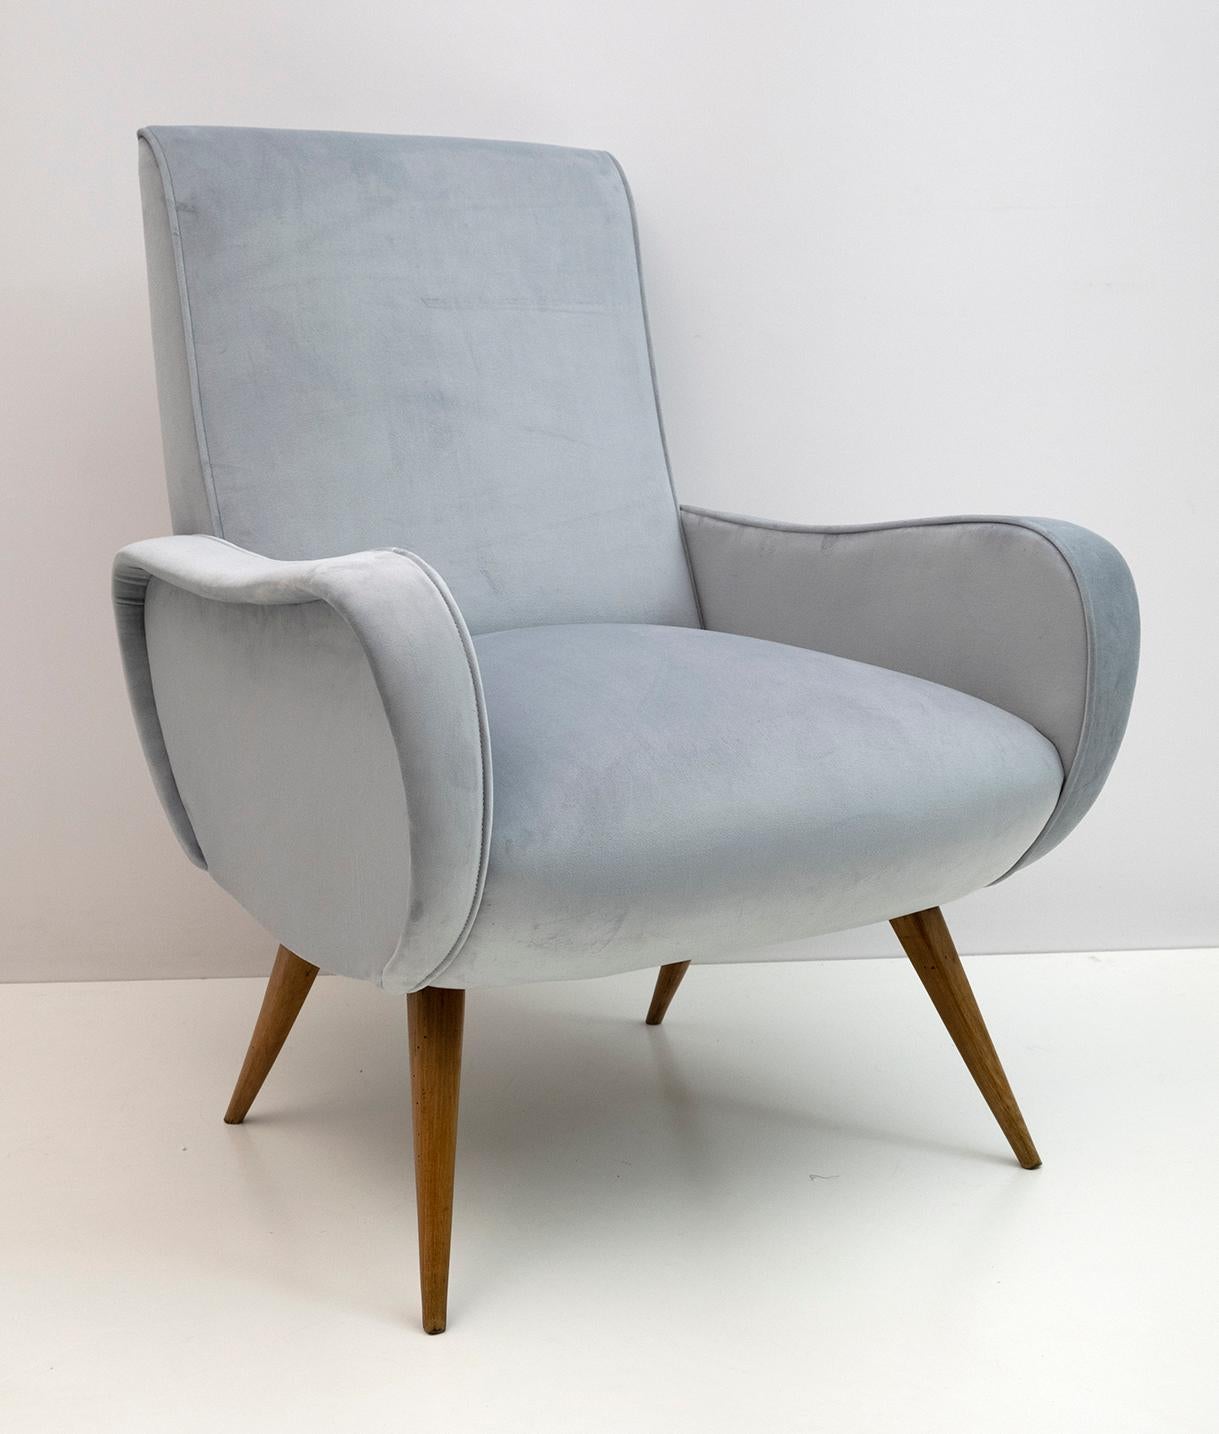 Marco Zanuso style armchair. The armchair has been restored and reupholstered in blue velvet, the feet are in beech wood.